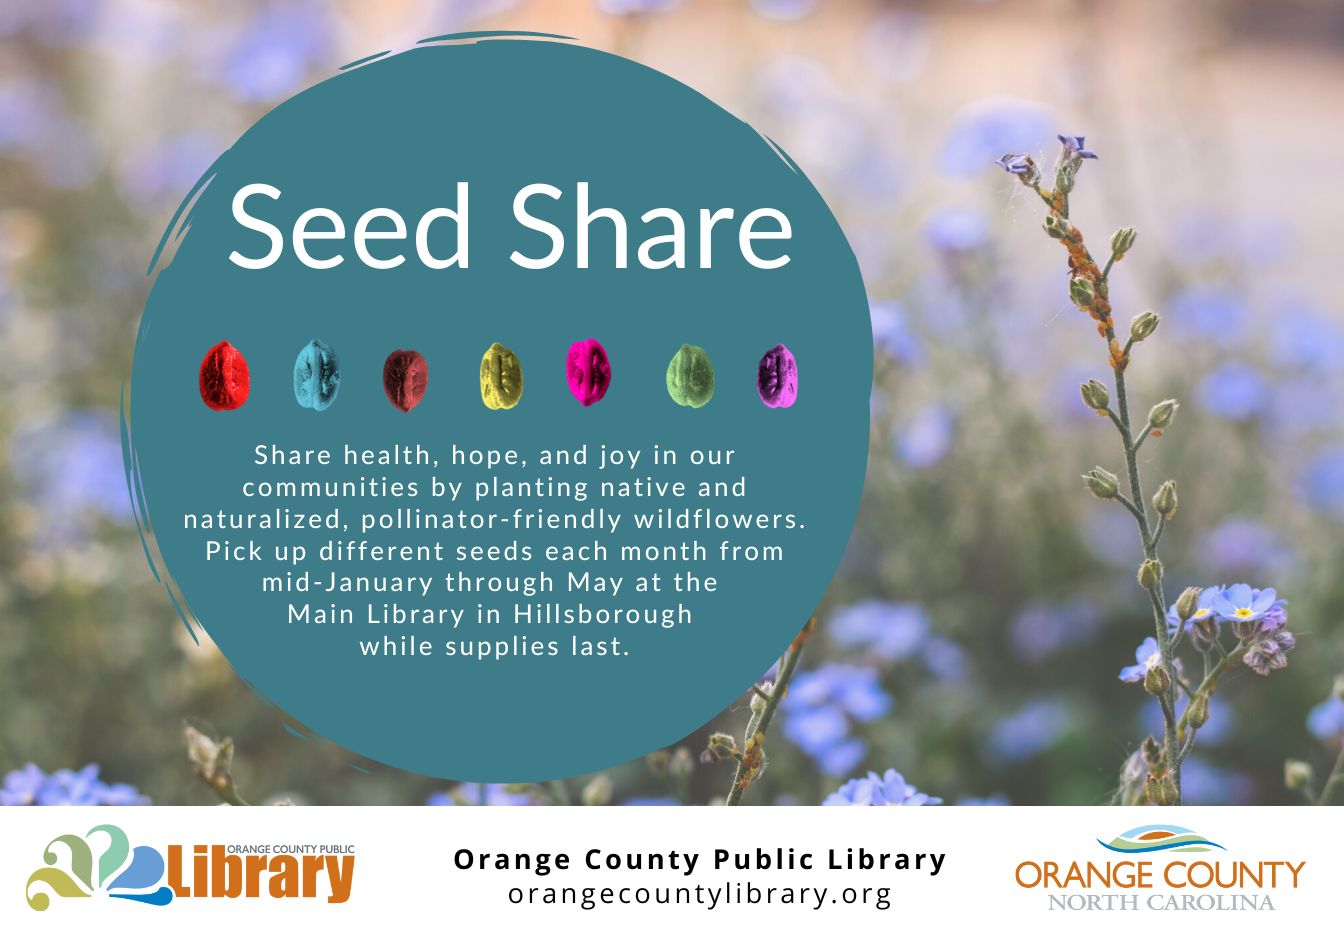 Share health, hope, and joy throughout our communities by planting pollinator-friendly wildflowers that are native or naturalized to our area. Seed packs with information and instructions will available on the 2nd floor of the Main Library in Hillsborough. A different plant will be featured each month from January through May.